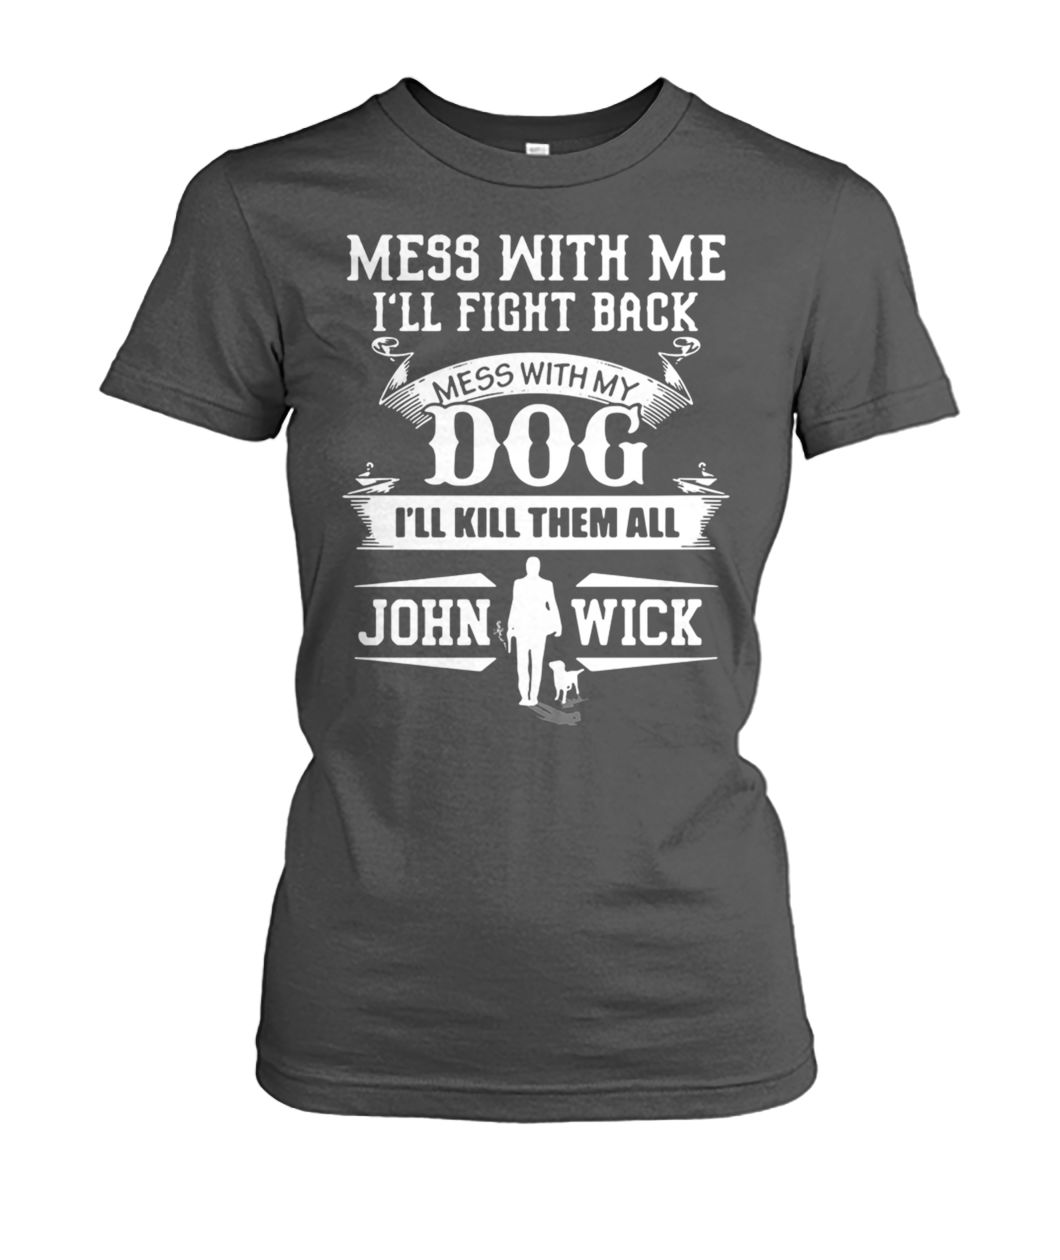 Mess with me I'll fight back mess with my dog I'll kill them all john wick women's crew tee